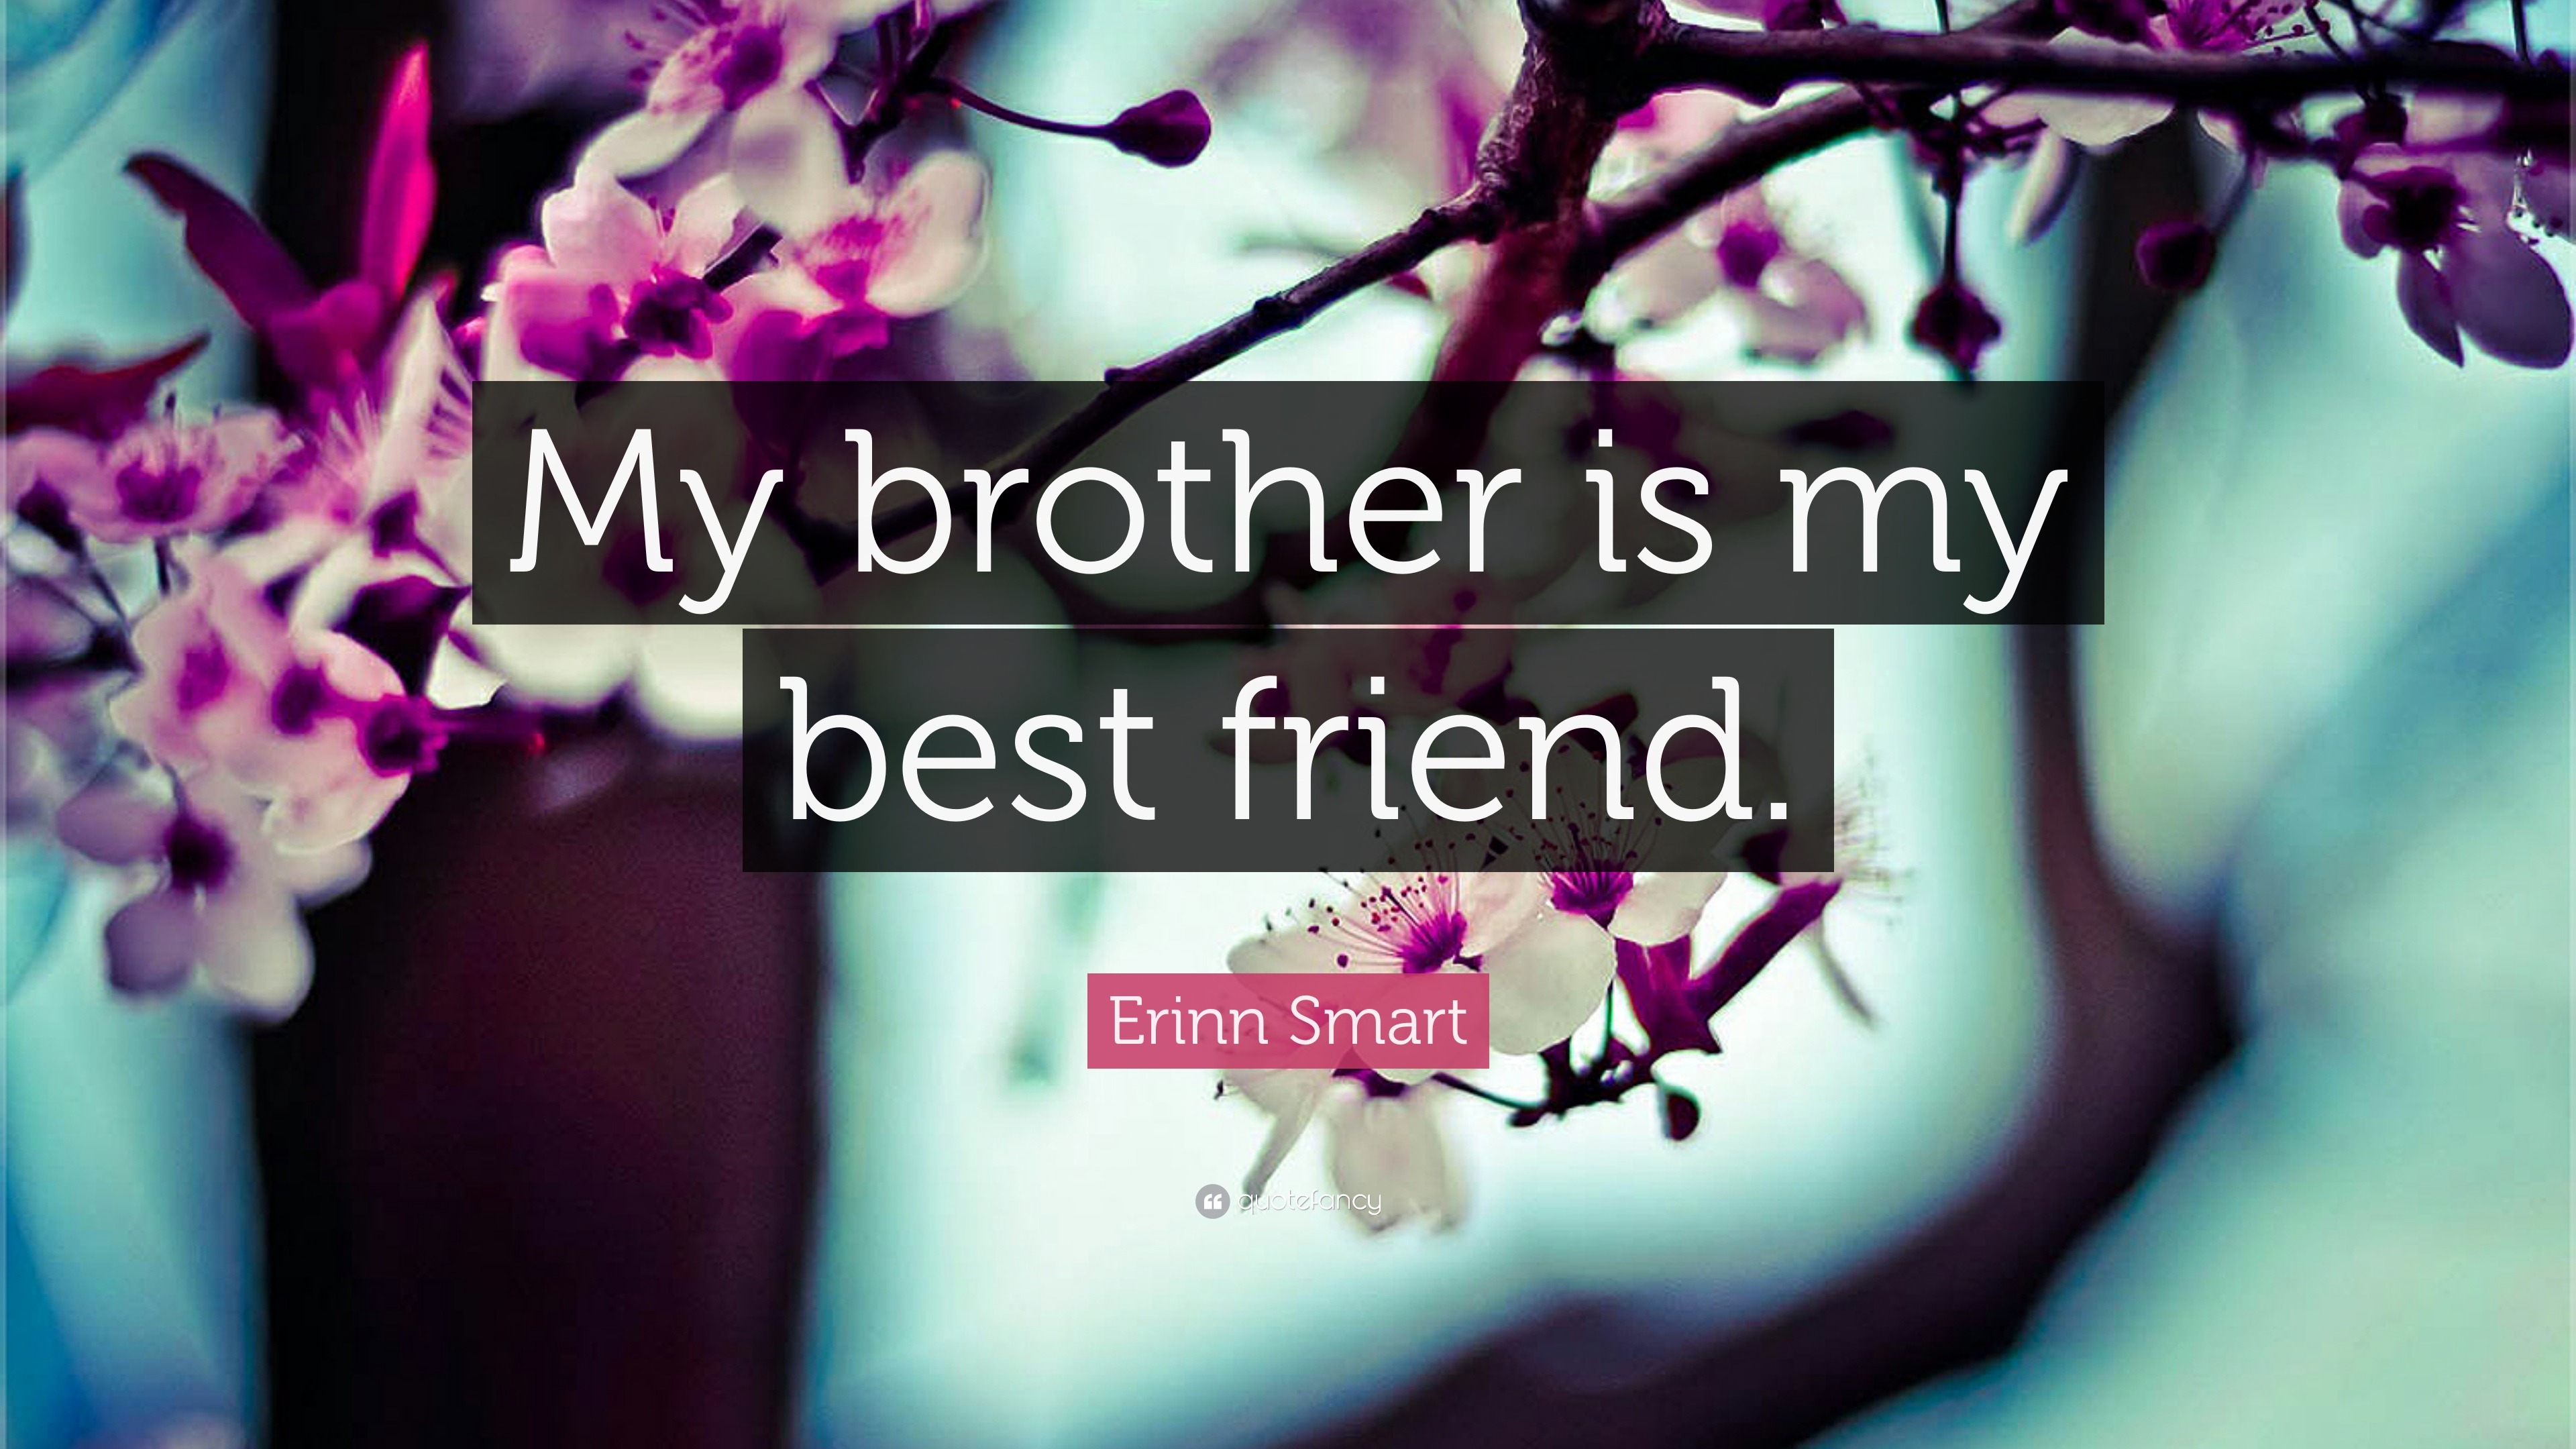 Erinn Smart Quote “My brother is my best friend ”